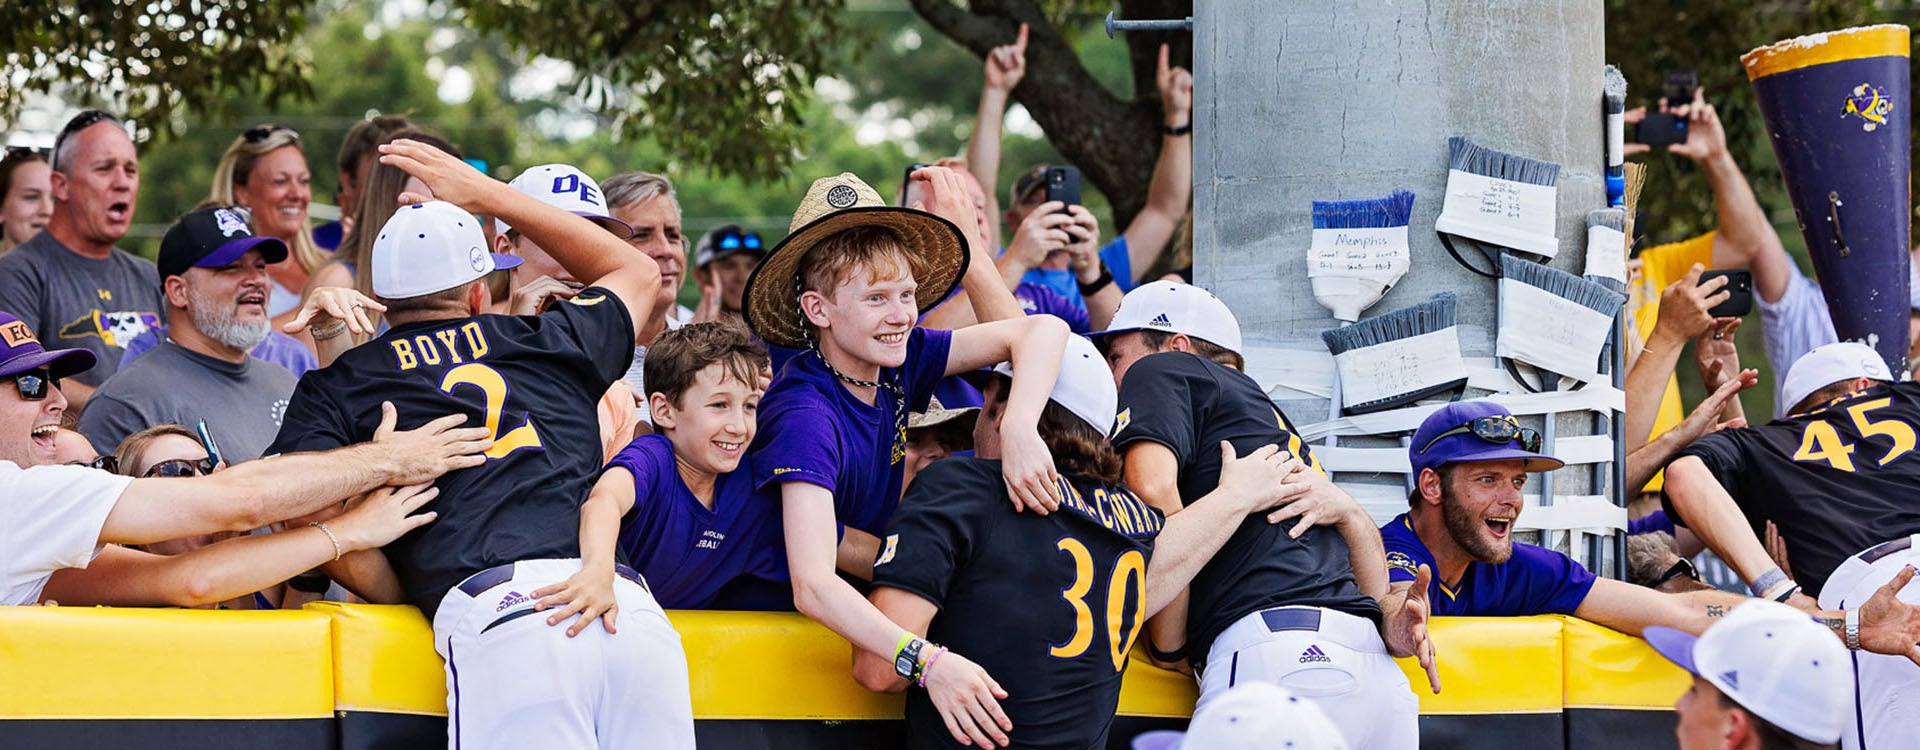 East Carolina baseball players celebrate with fans in The Jungle after winning the NCAA Greenville Regional championship. 